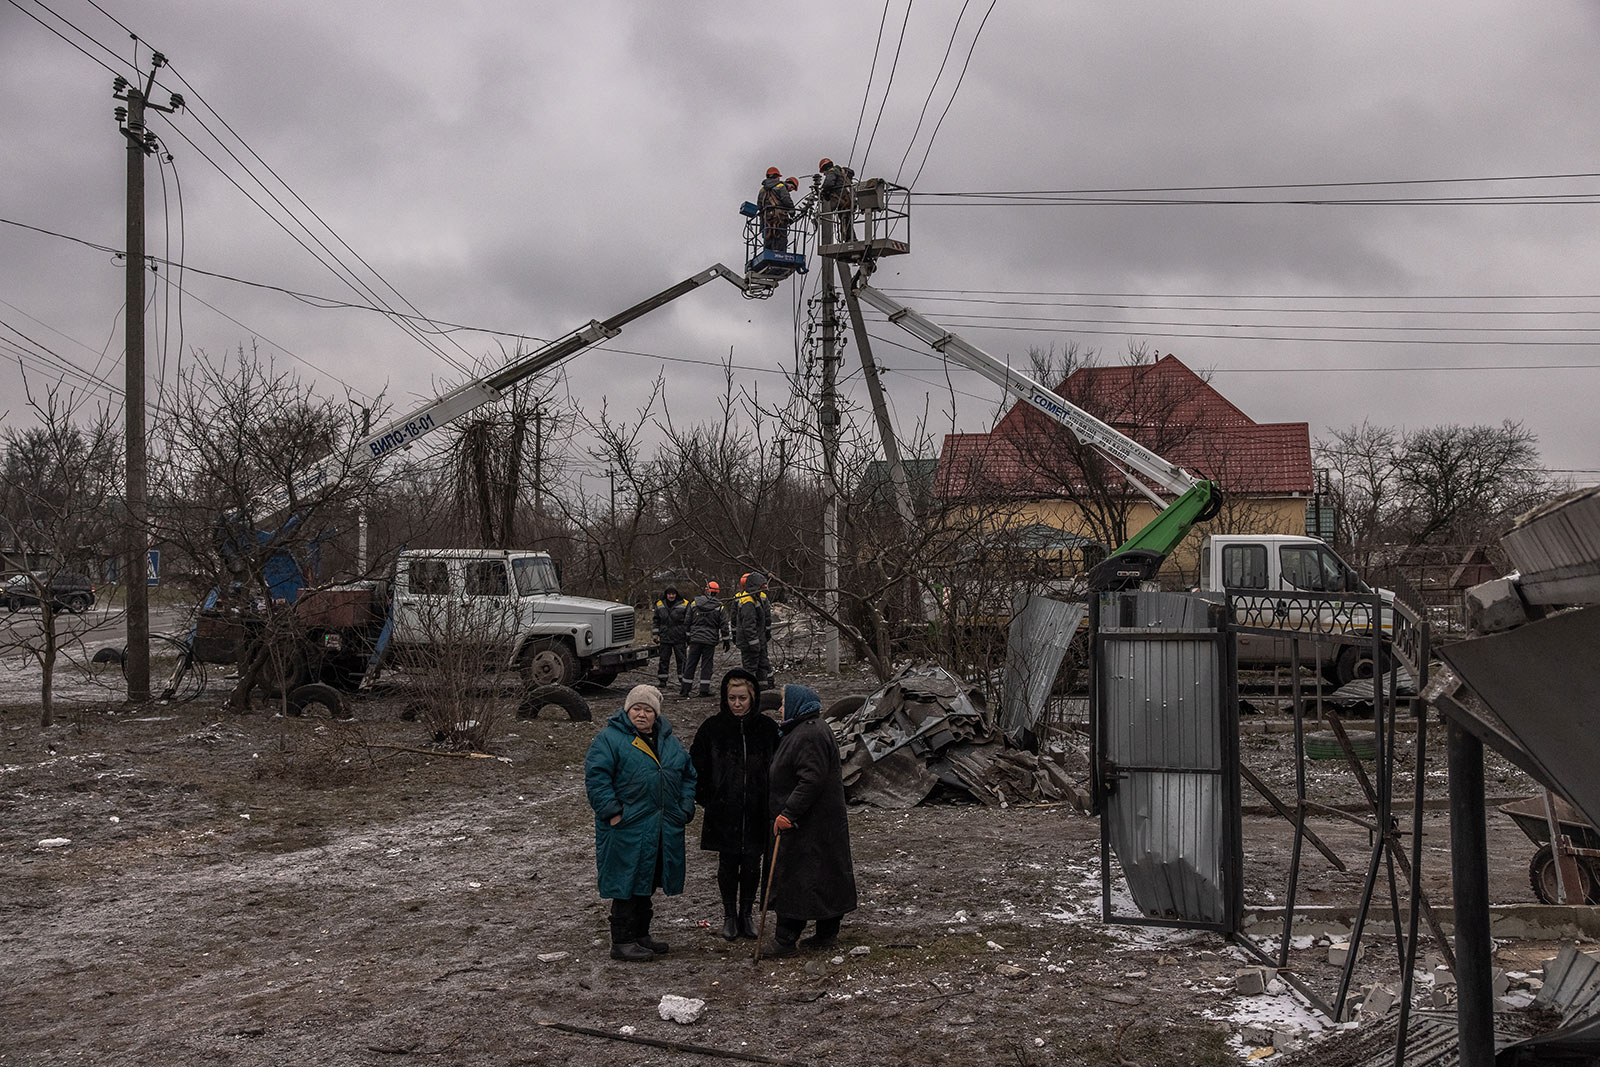 Women stand next to damaged residential houses as workers try to repair electricity cables following Russian missile attacks on January 26 outside of Kyiv, Ukraine.